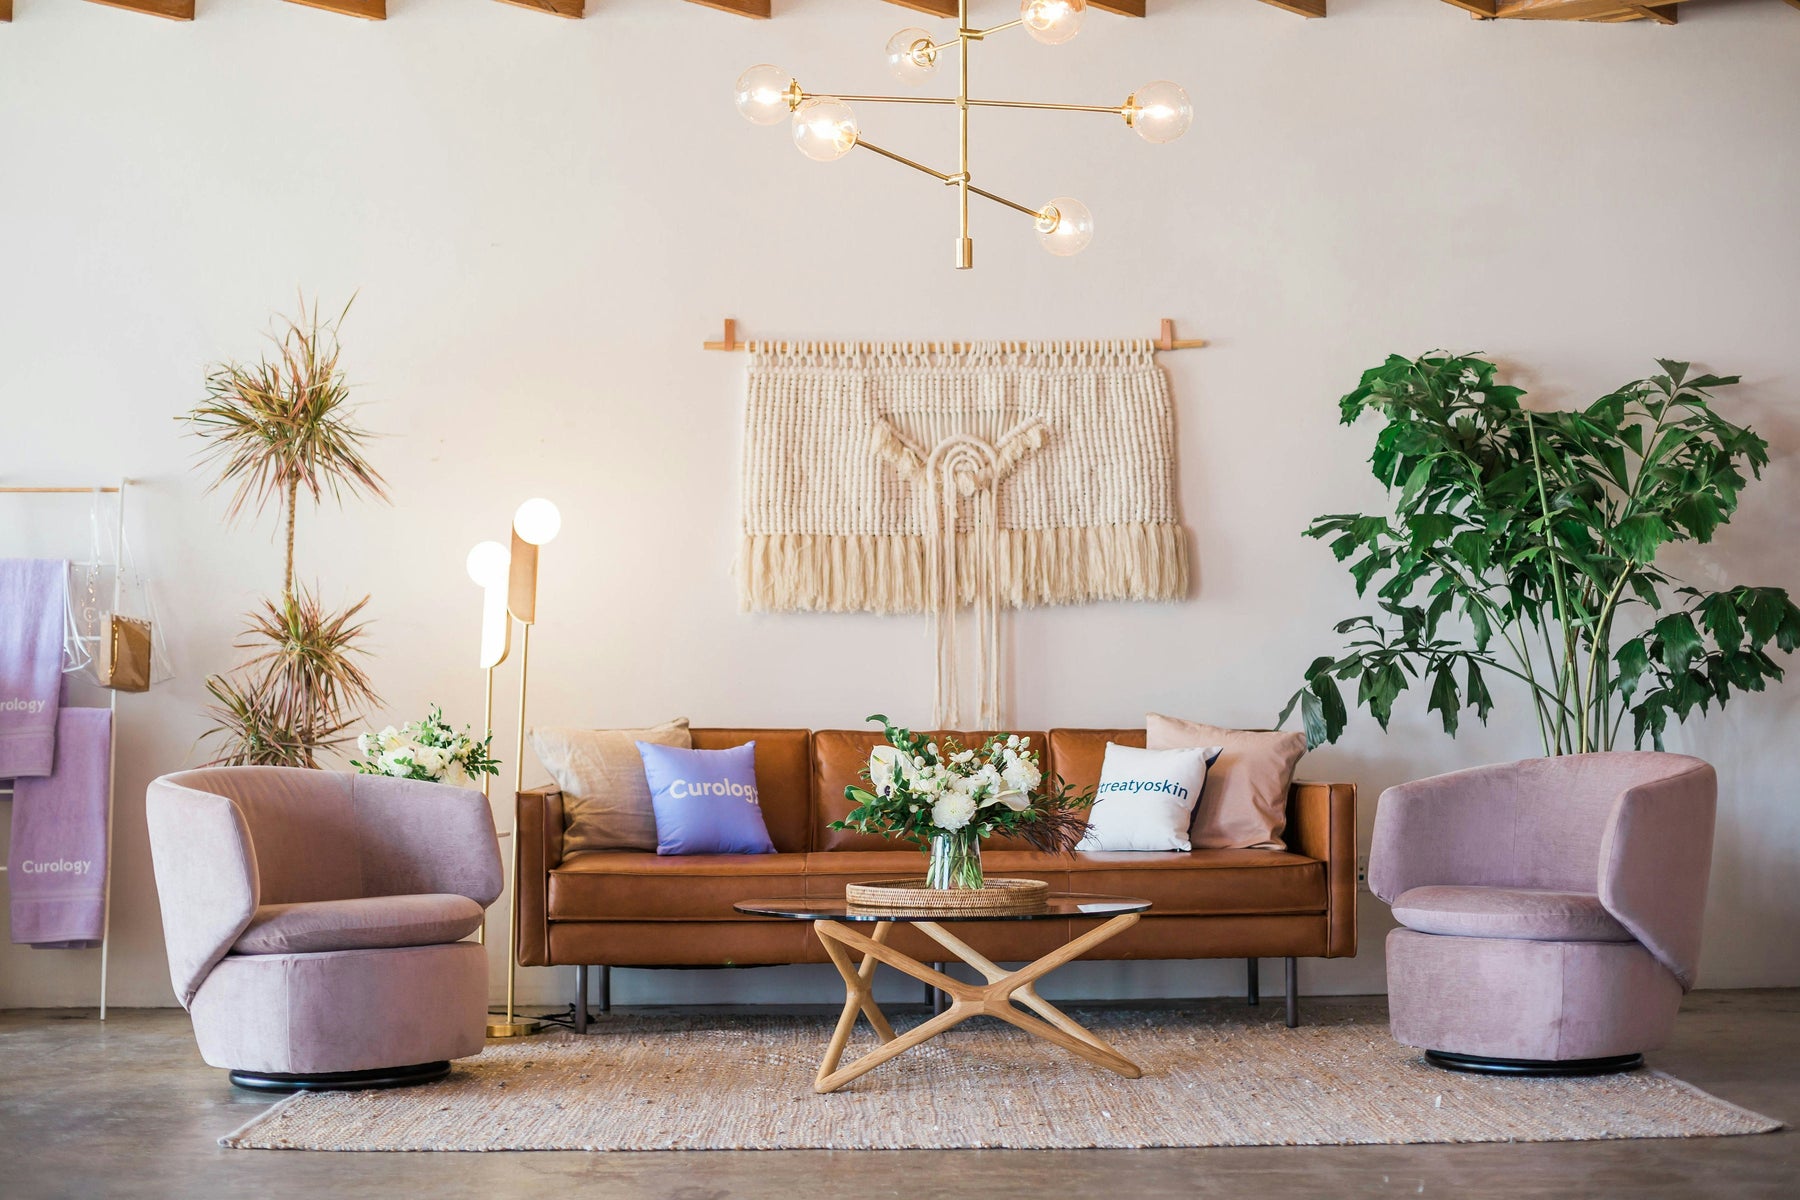 Boho Chic: Embracing the Bohemian Aesthetic in Home Decor